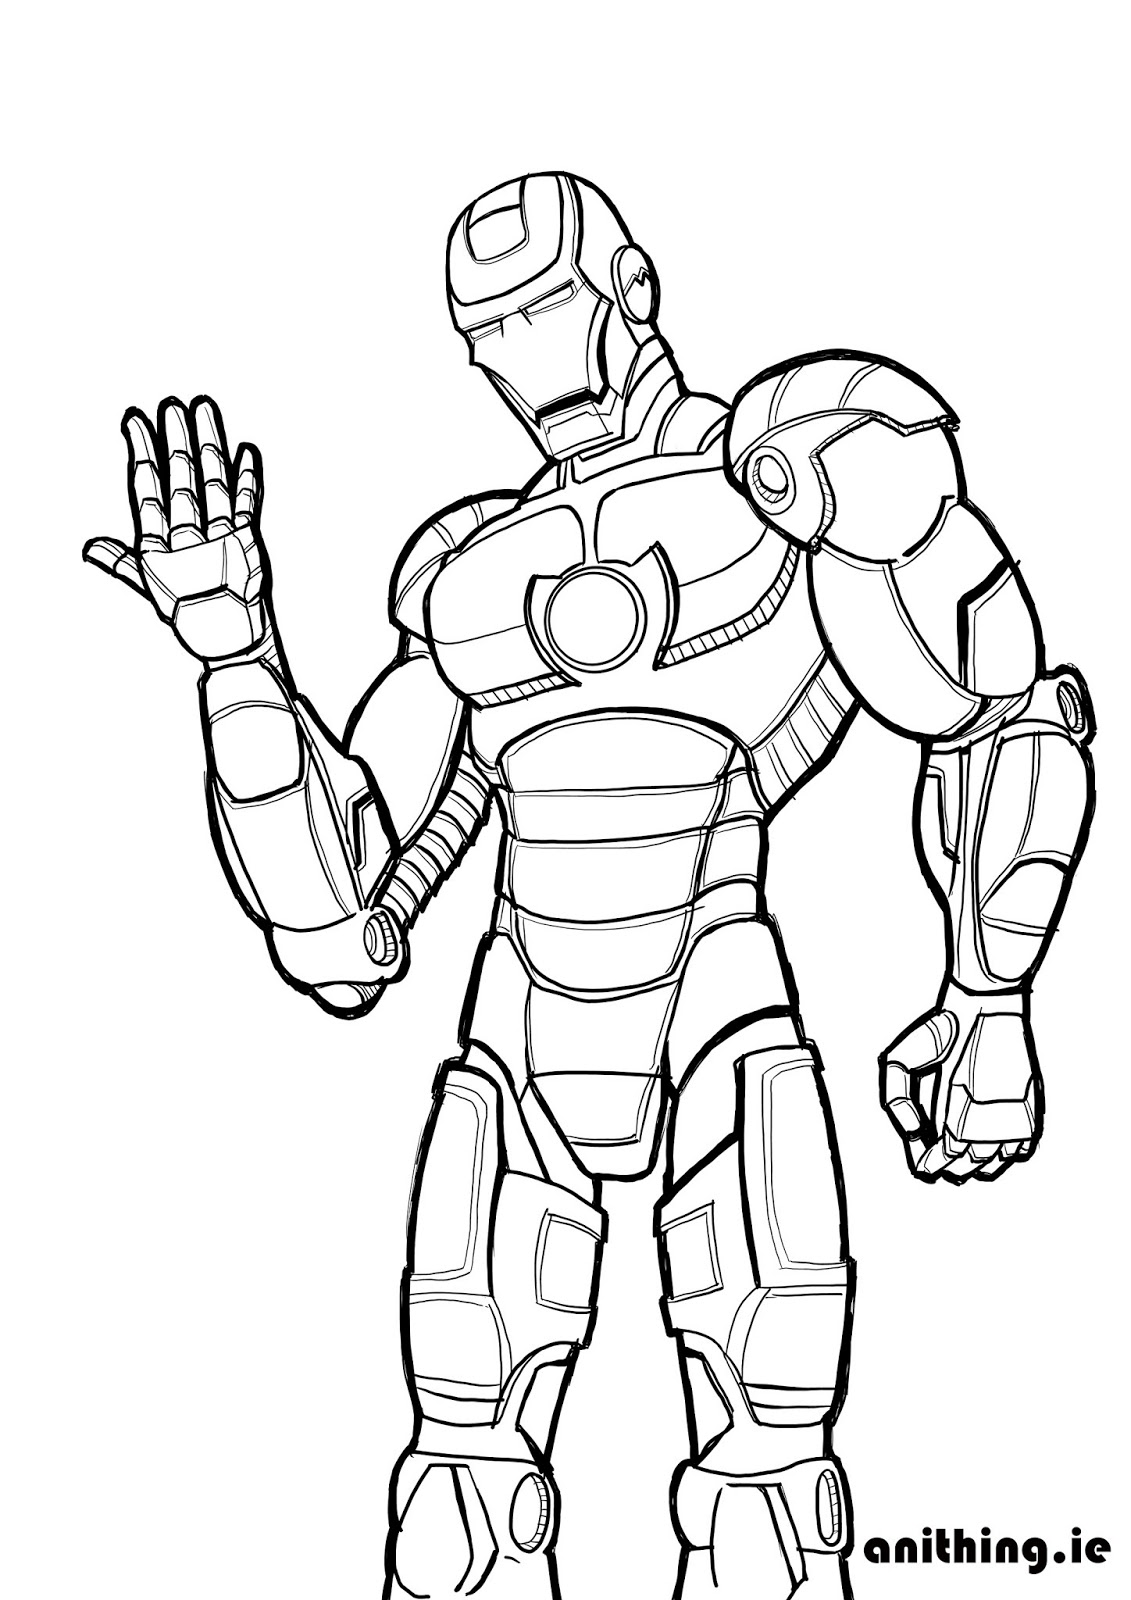 Download Iron Spider Man Coloring Pages Coloring Pages